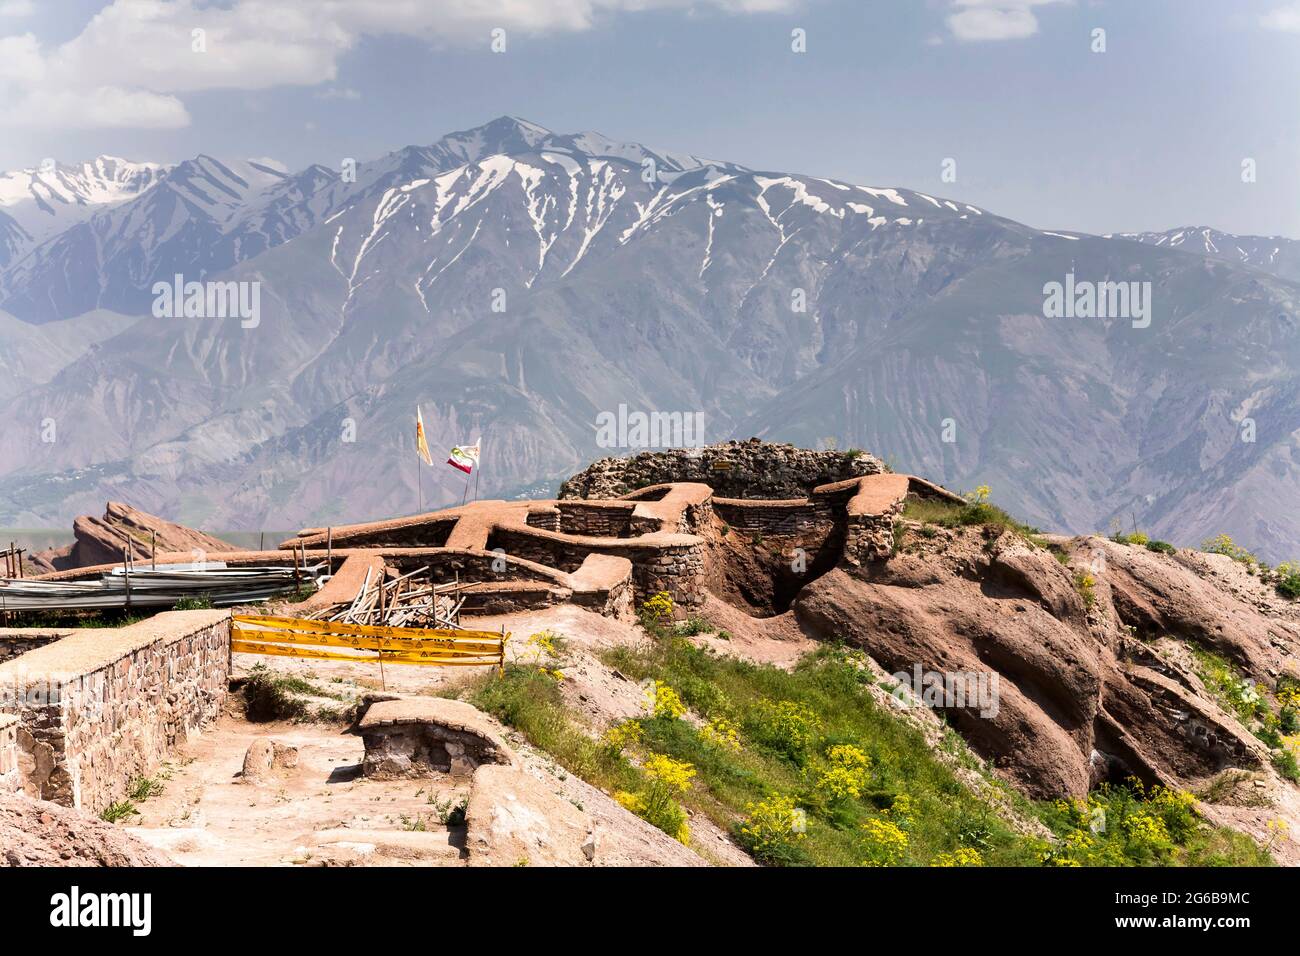 Alamut Castle, archaeological site on steep hilltop, Alamut, Qazvin Province, Iran, Persia, Western Asia, Asia Stock Photo